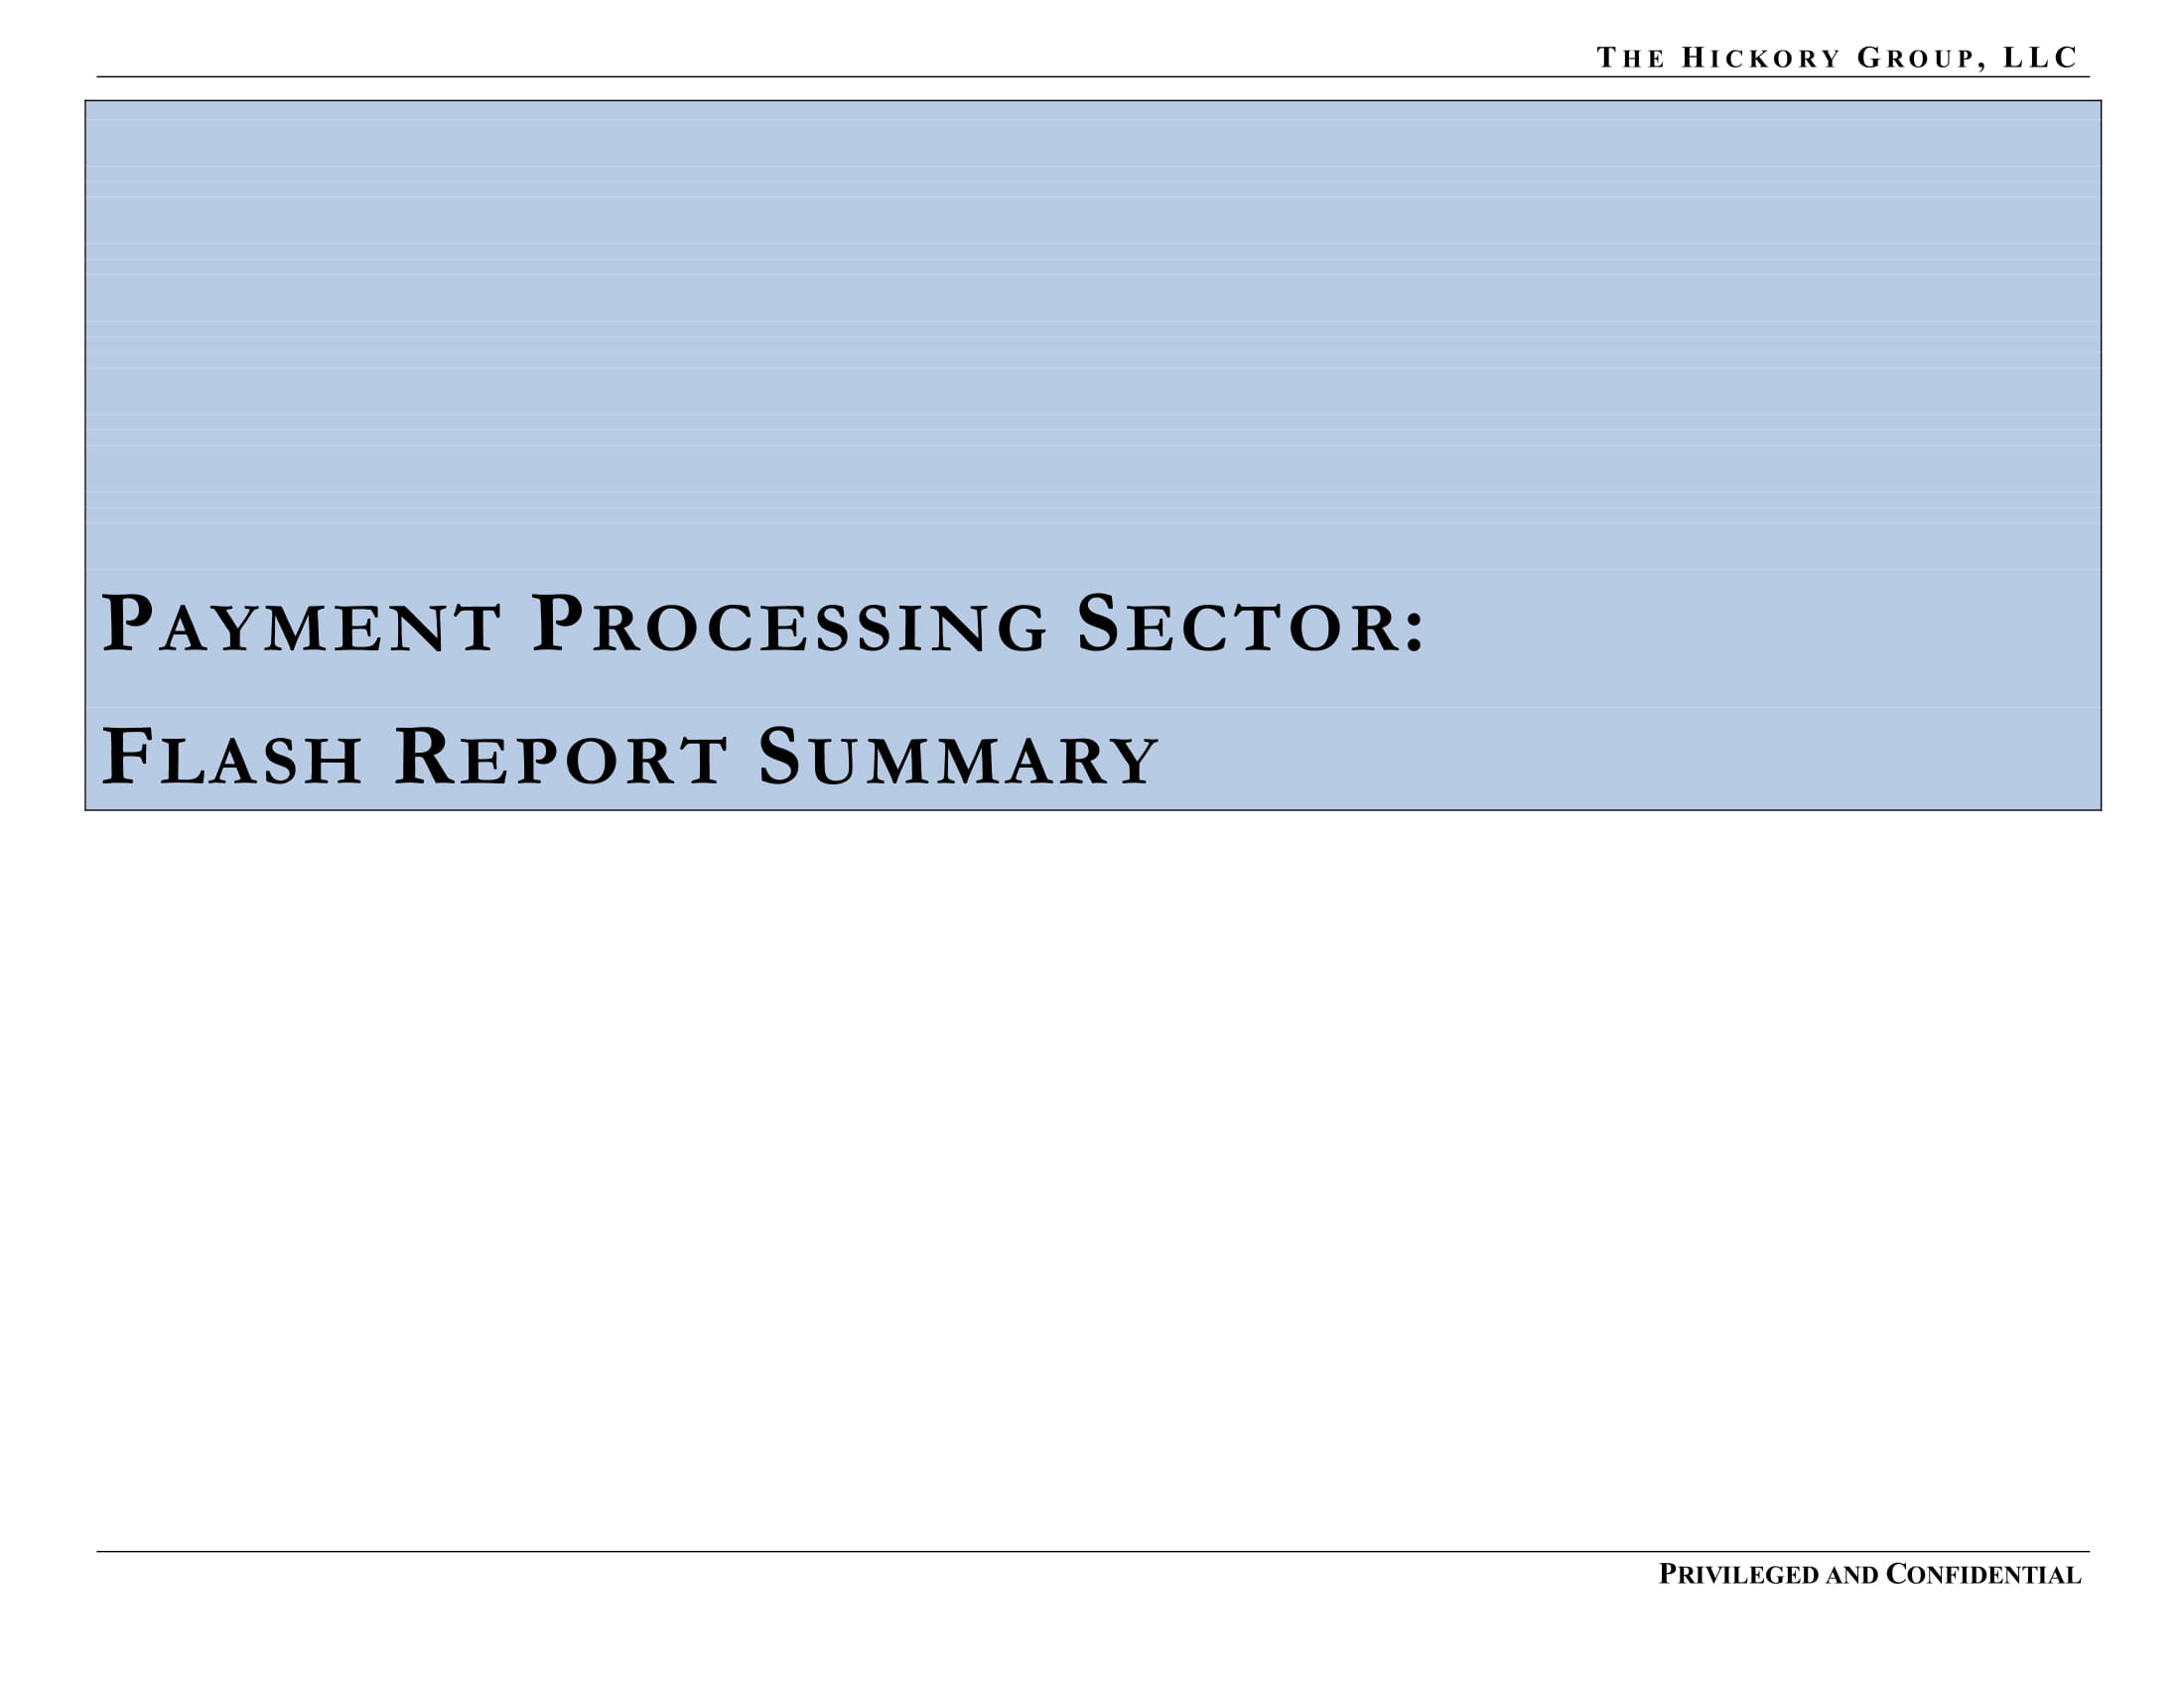 FINAL_THG FinTech Industry - Payment Processing Sector Flash Report (27 March 2019) Privileged & Confidential-03.jpg